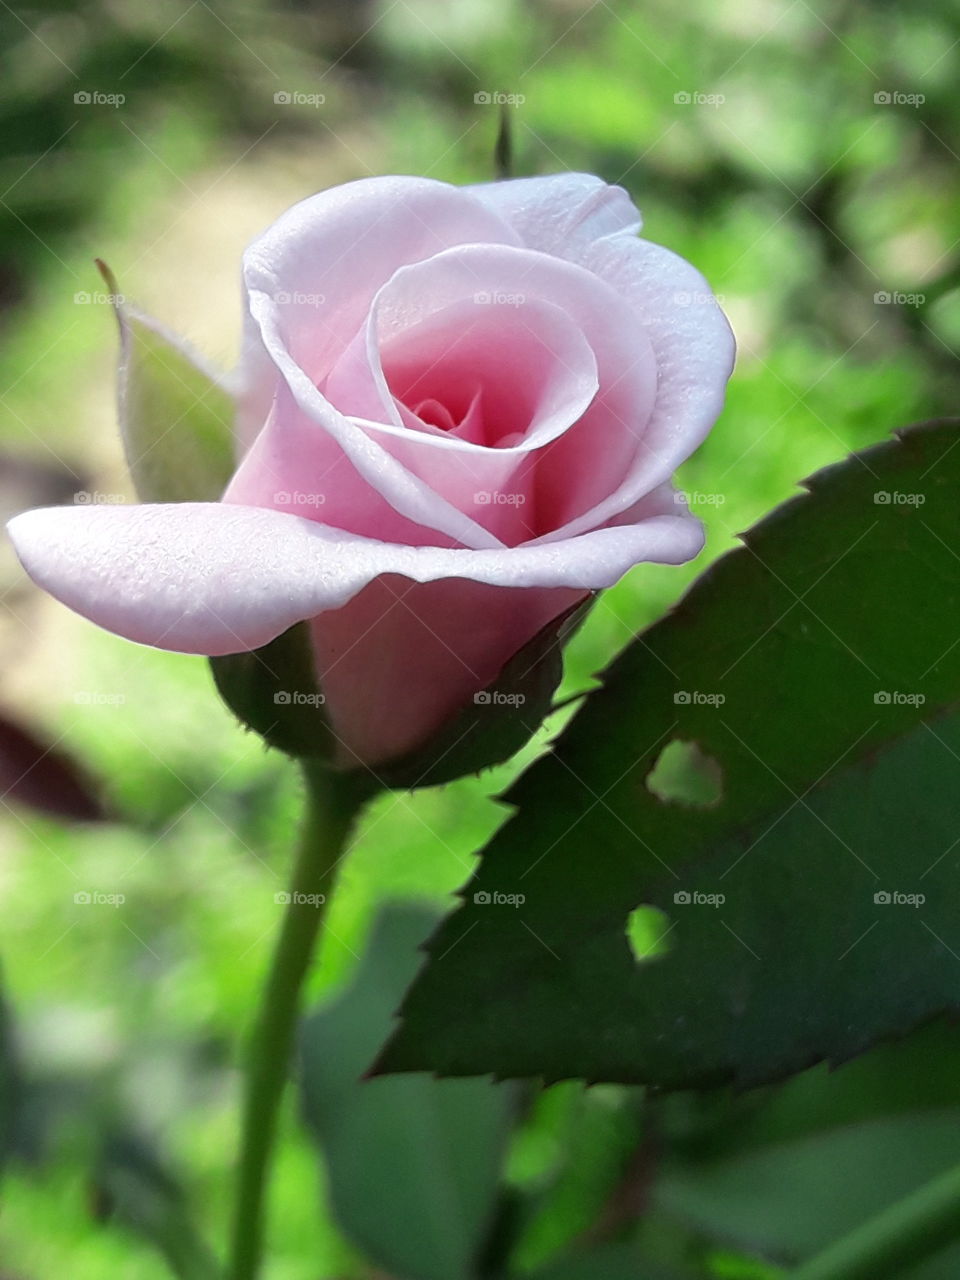 Rose blooming near the leaf